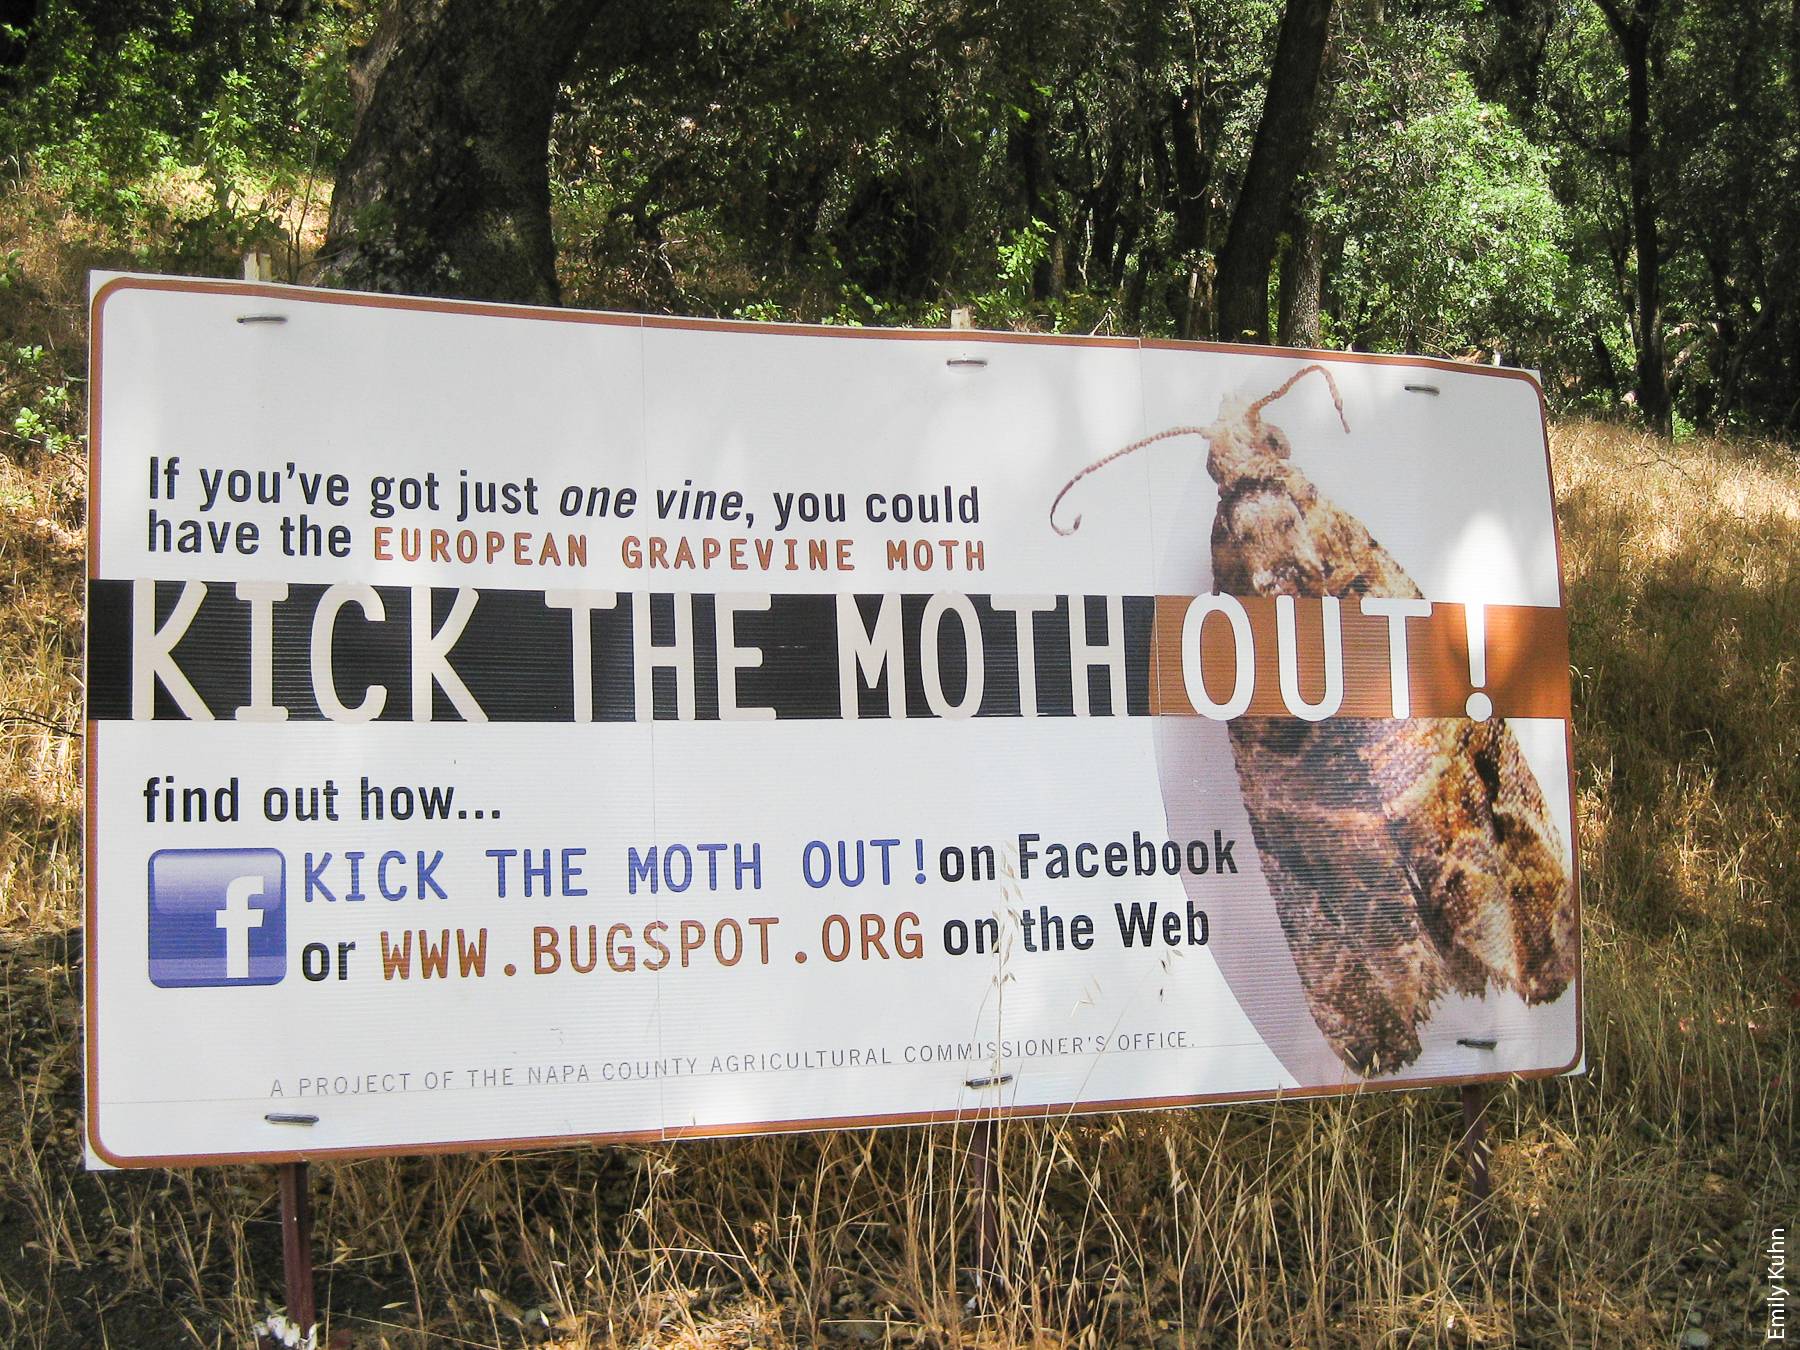 The public campaign “Kick the Moth Out” raised awareness of the EGVM program in Napa County.